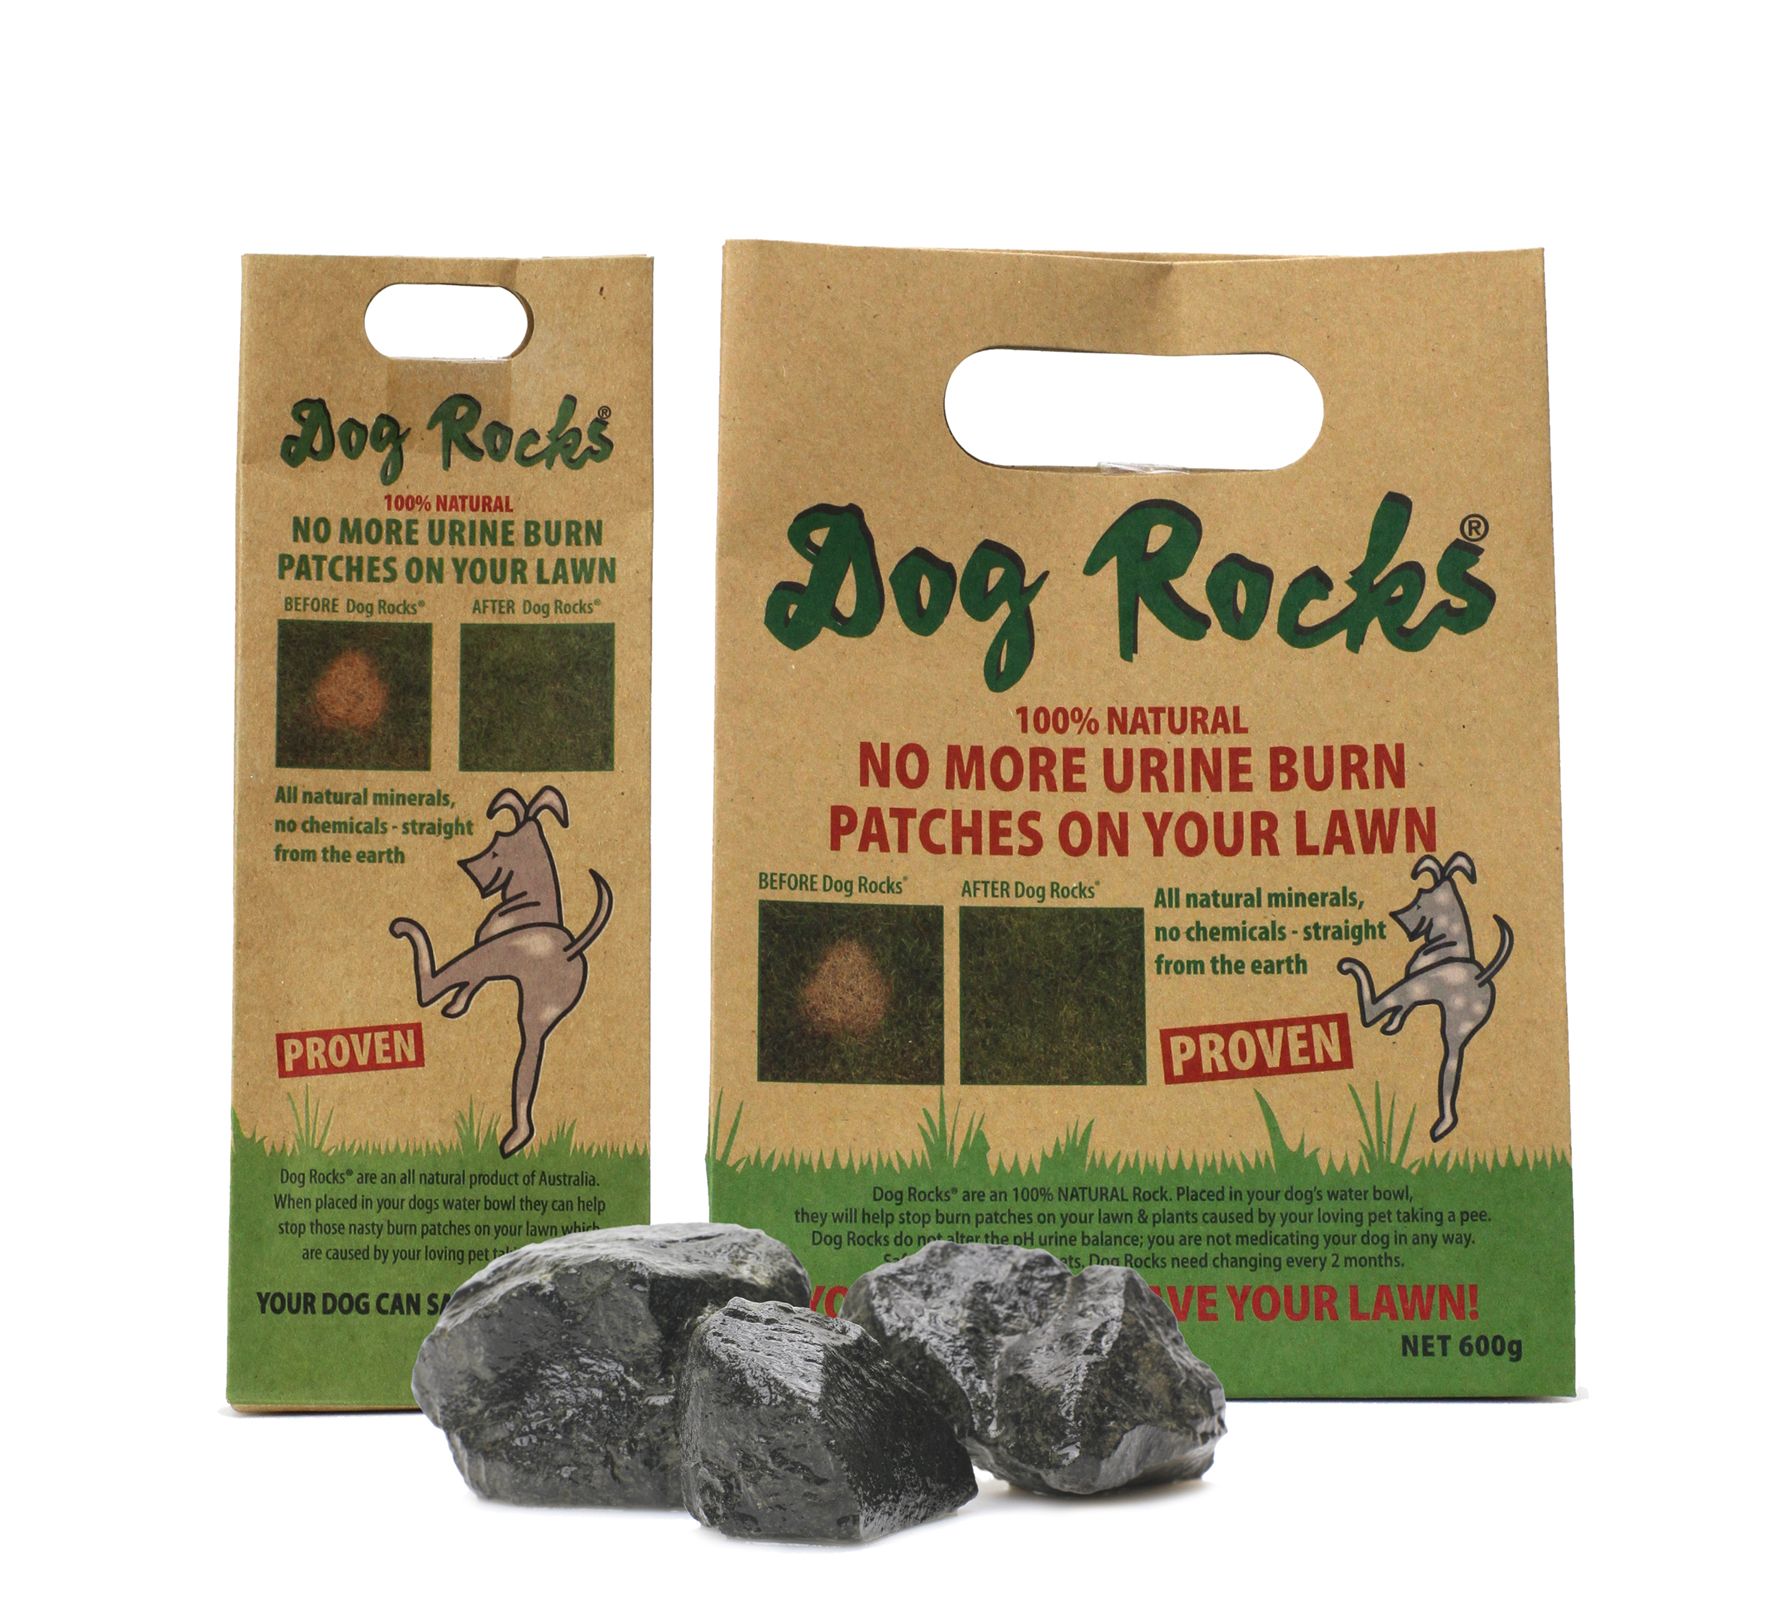 10% off all orders of Dog Rocks for the duration of the show!